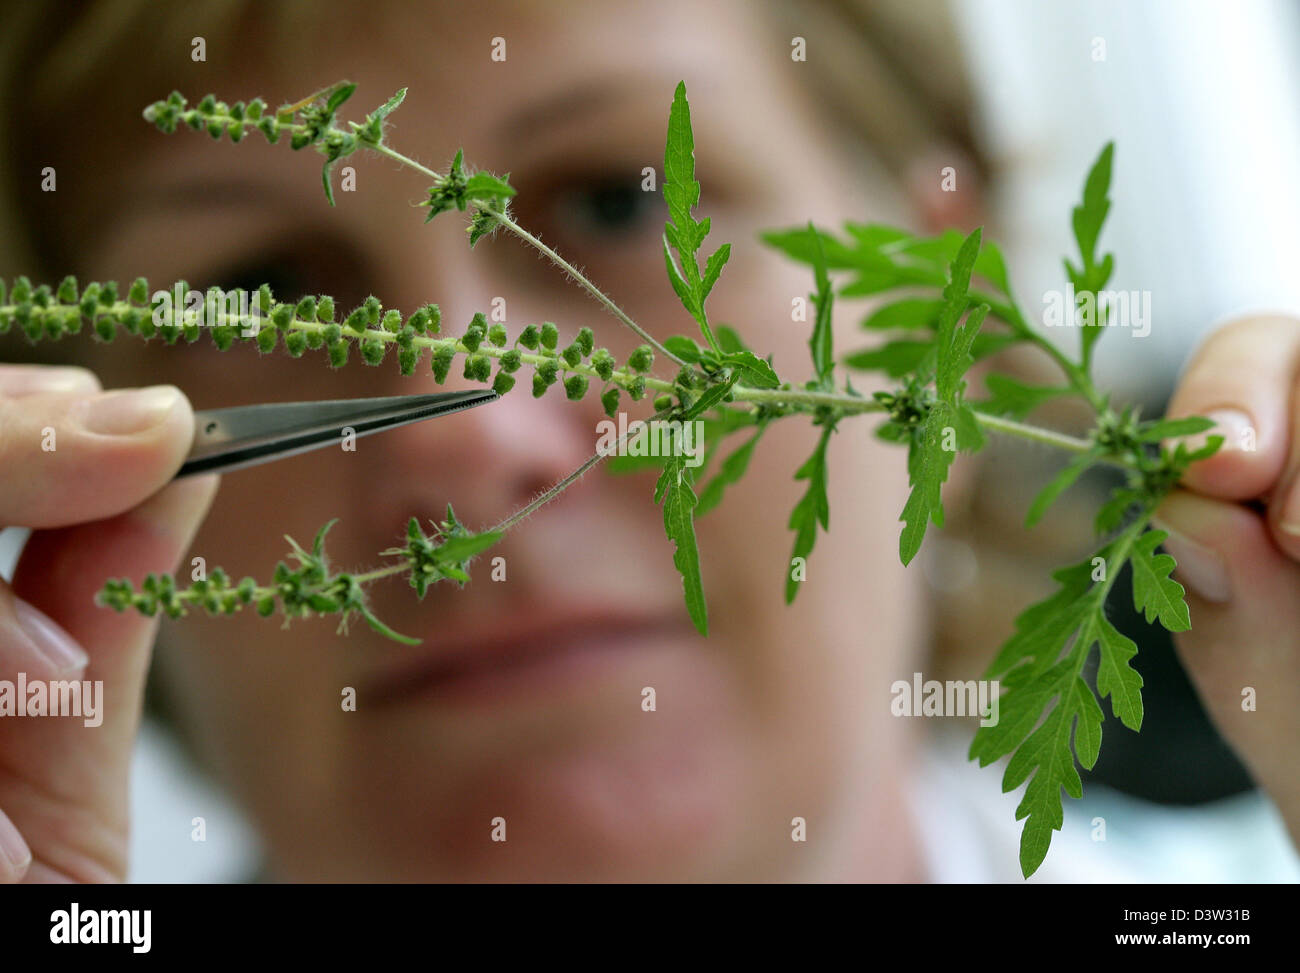 (dpa file) -  Petra Lange of the Leibniz Centre for Agrarian Landscape Research (ZALF) examines a common ragweed plant  (Ambrosia artemisiifolia) in Muencheberg, Germany, 19 September 2006. The Federal Bilogical Research Centre (BBA) announced to take actions against the plant spreading all over Germany. All signs point at a highly increased proliferation of the allergy causing wee Stock Photo